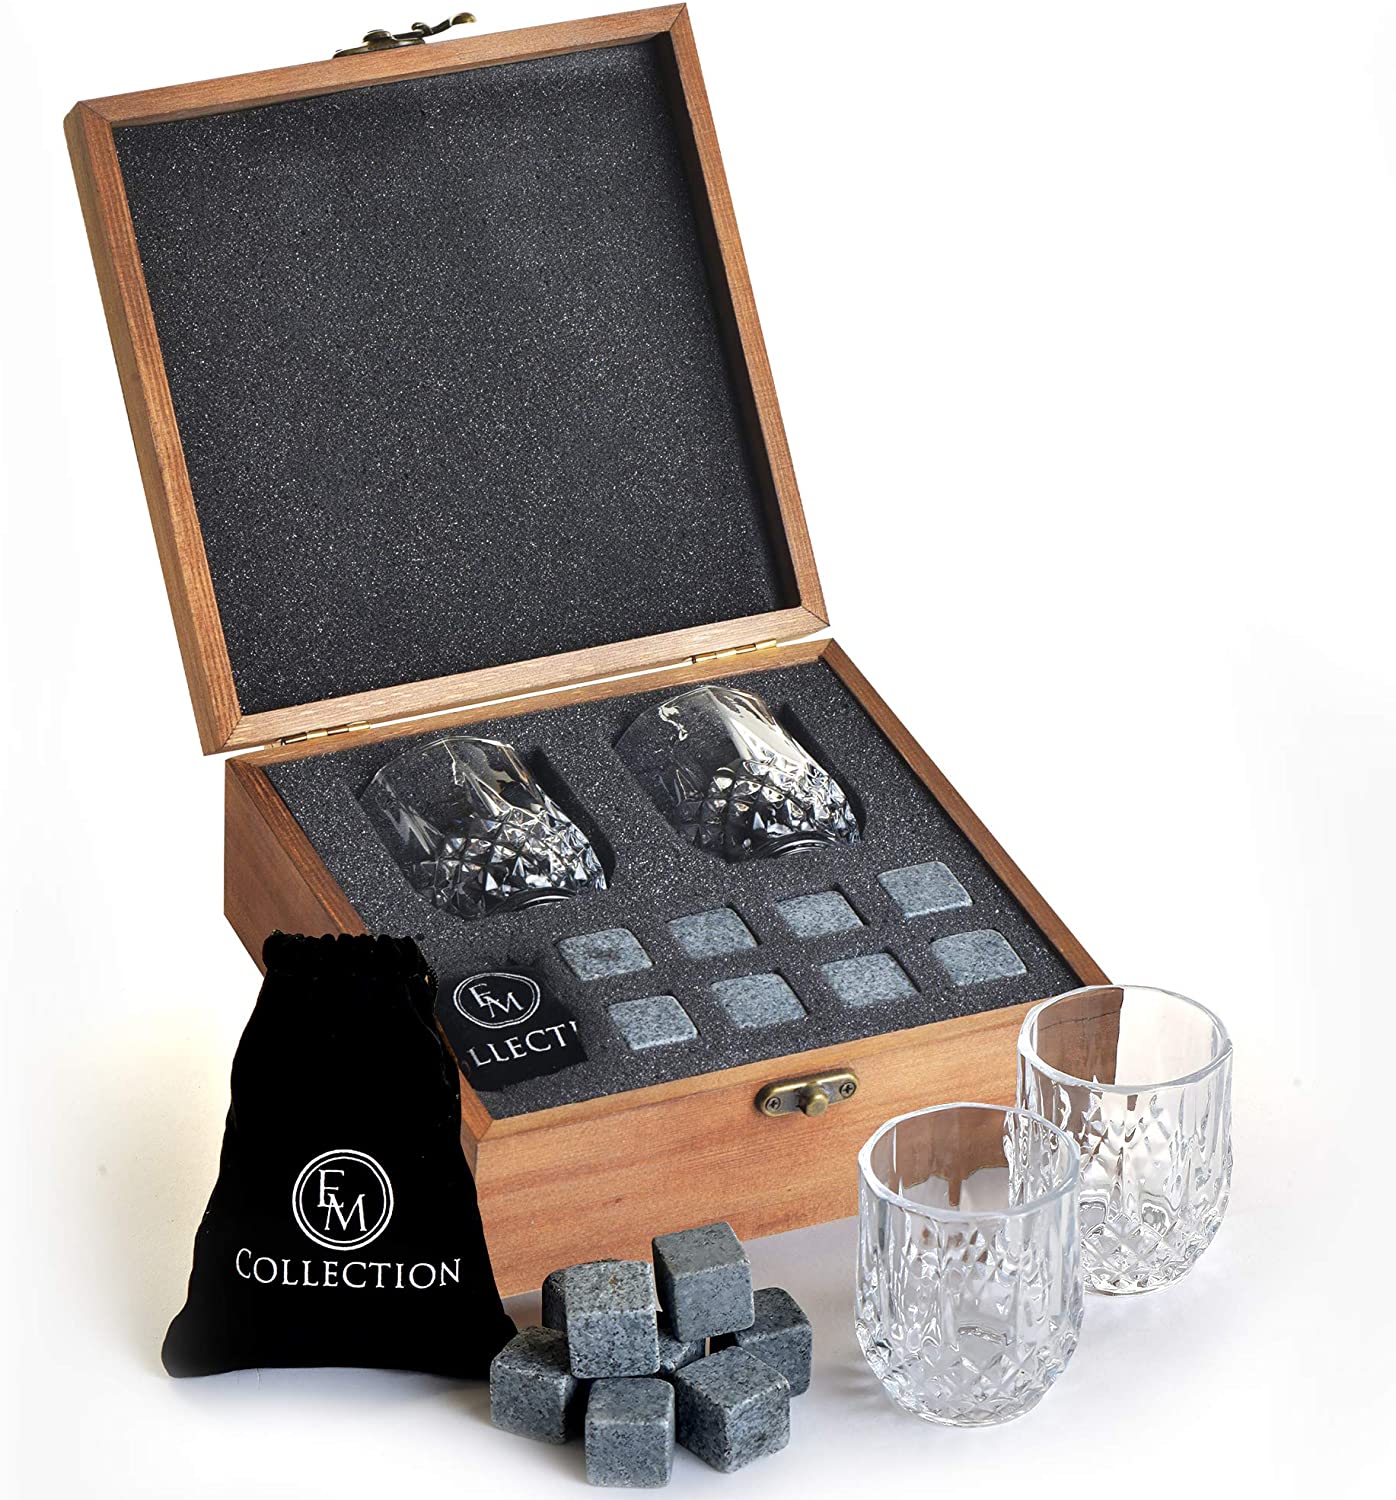 OEM Supply Whisky Gifts - Reusable Ice Cubes Chilling Stones and crystal whiskey wine glass wooden gift box set  – Shunstone